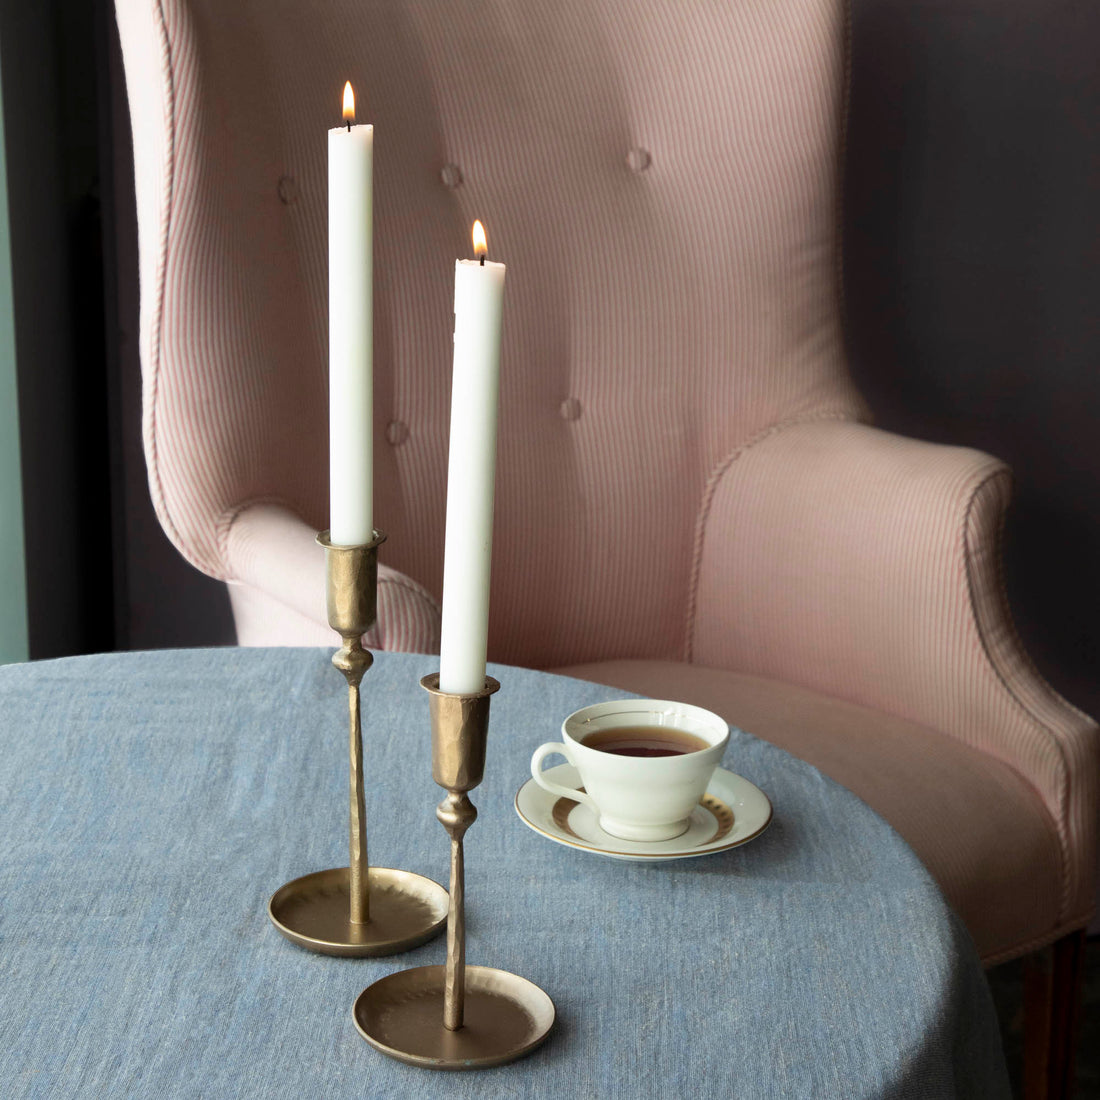 Two Percy Candlestick Brass Plated holders on a table beside a standard size cup of tea with a saucer.